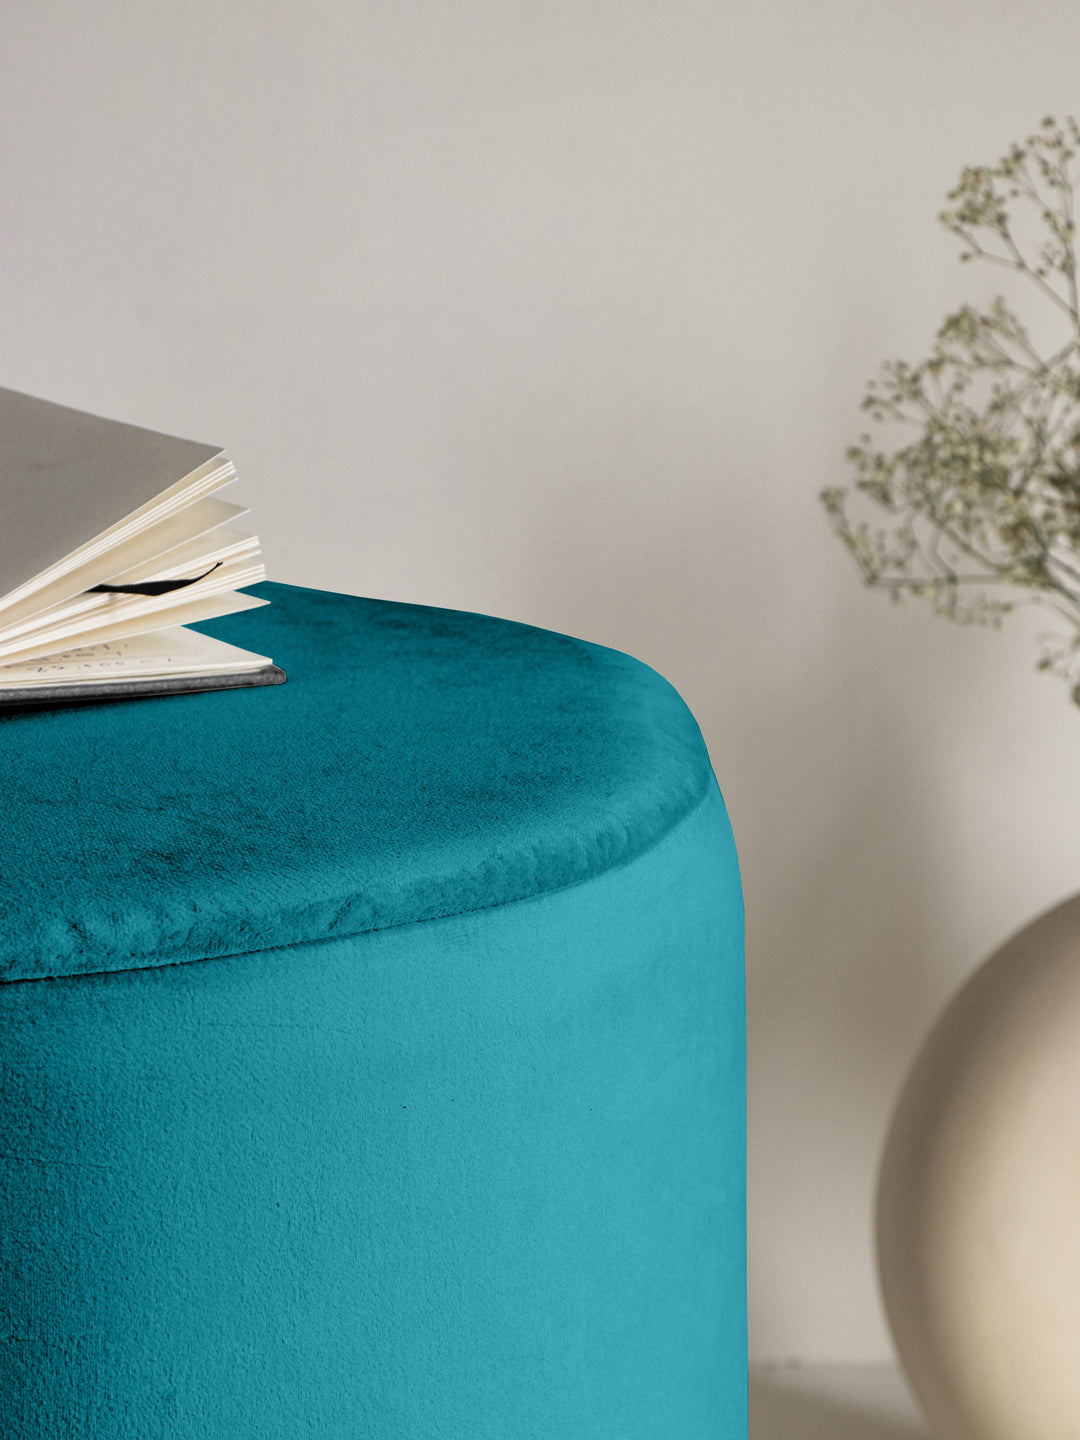 Teal Blue Stool With Gold Rings